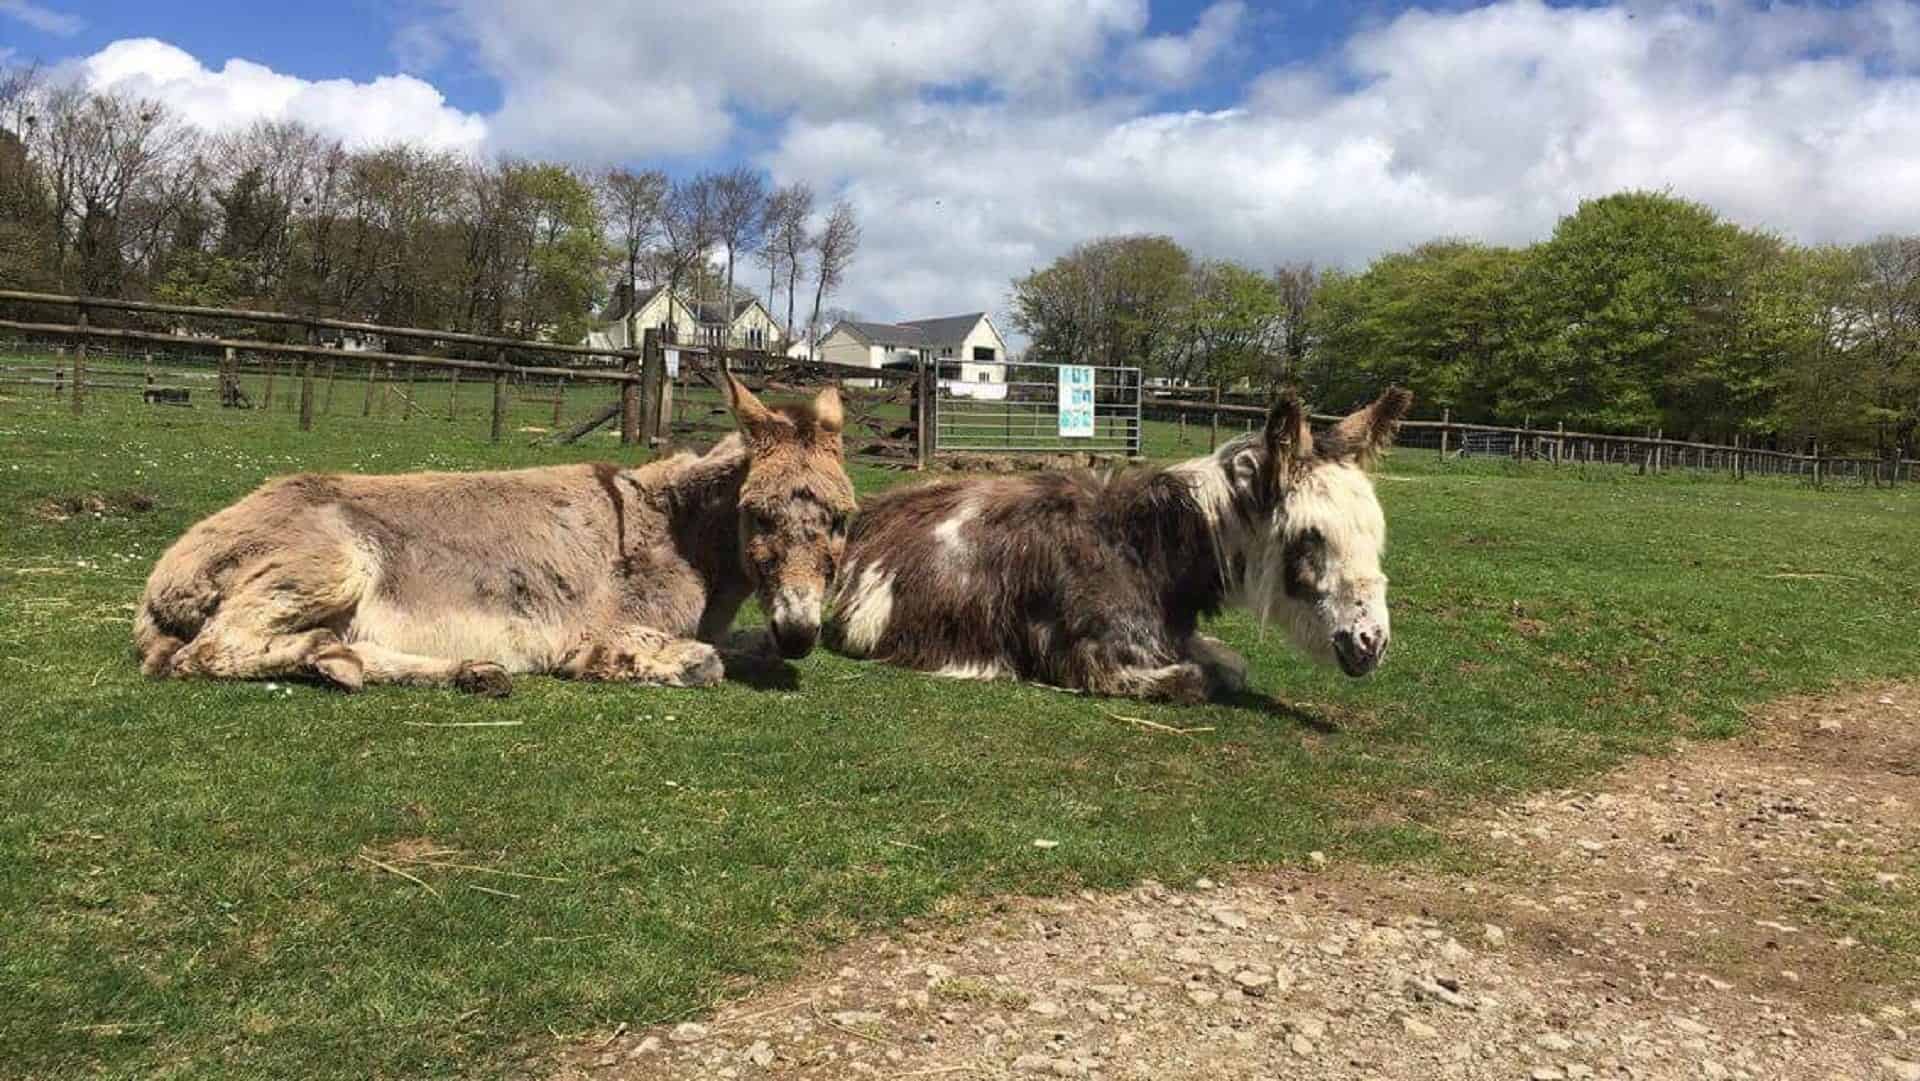 The Tamar Valley Donkey Park in UK